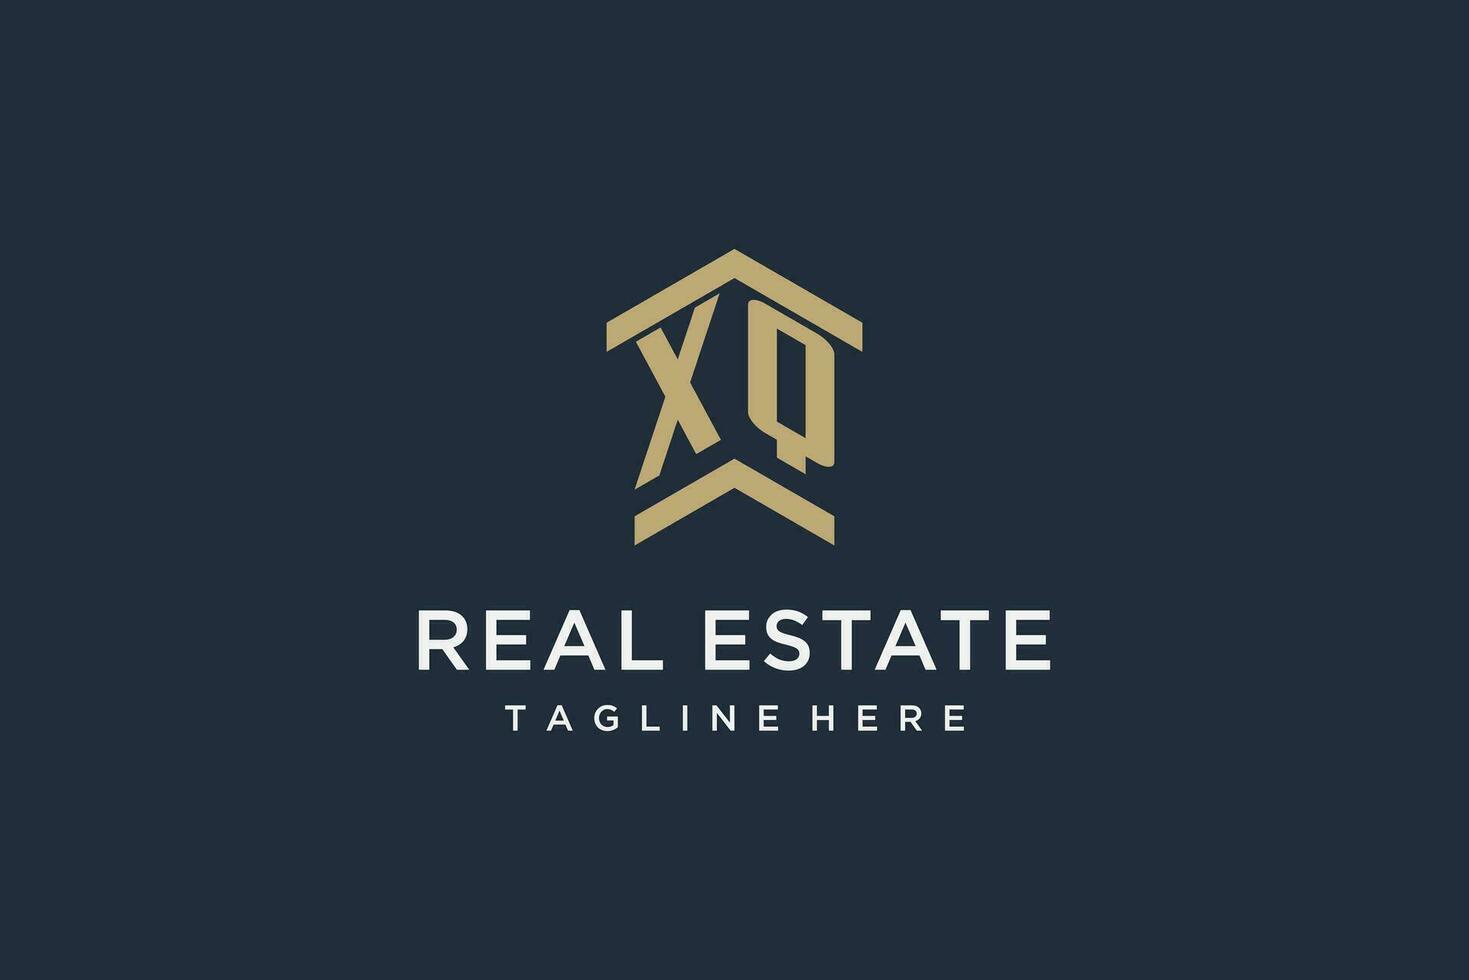 Initial XQ logo for real estate with simple and creative house roof icon logo design ideas vector